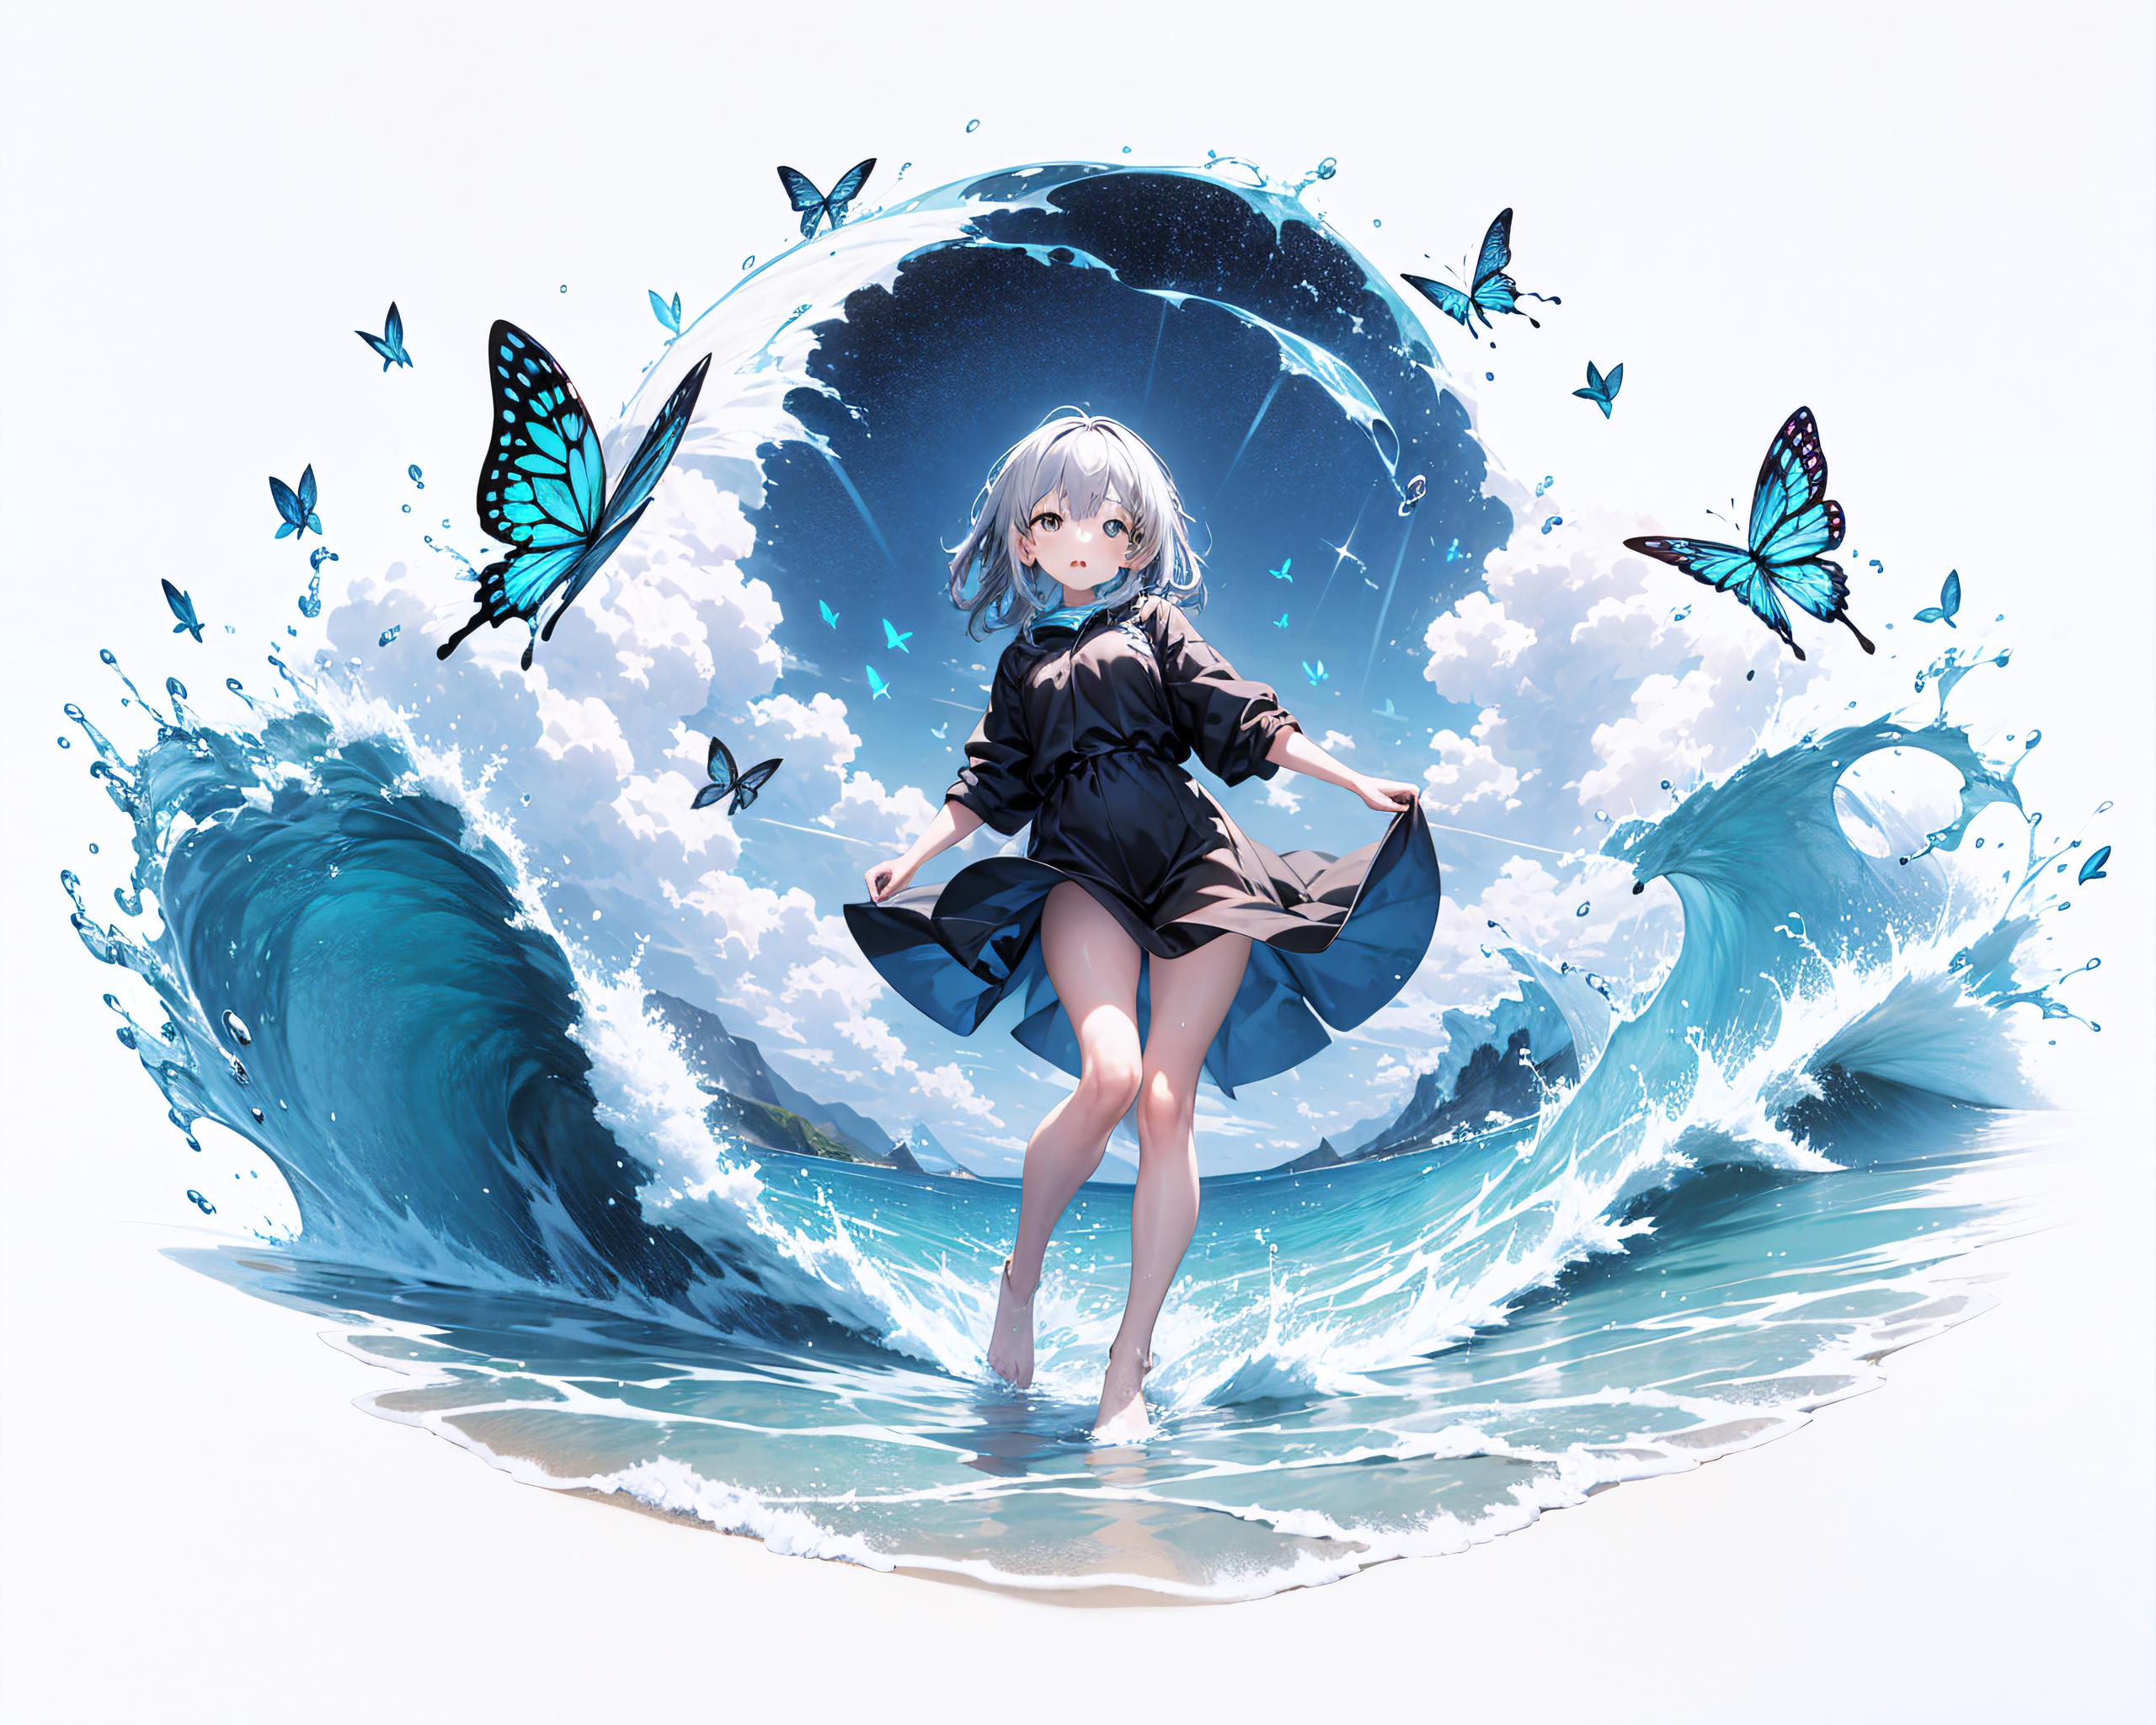 Anime girl with butterfly wings standing in the ocean.